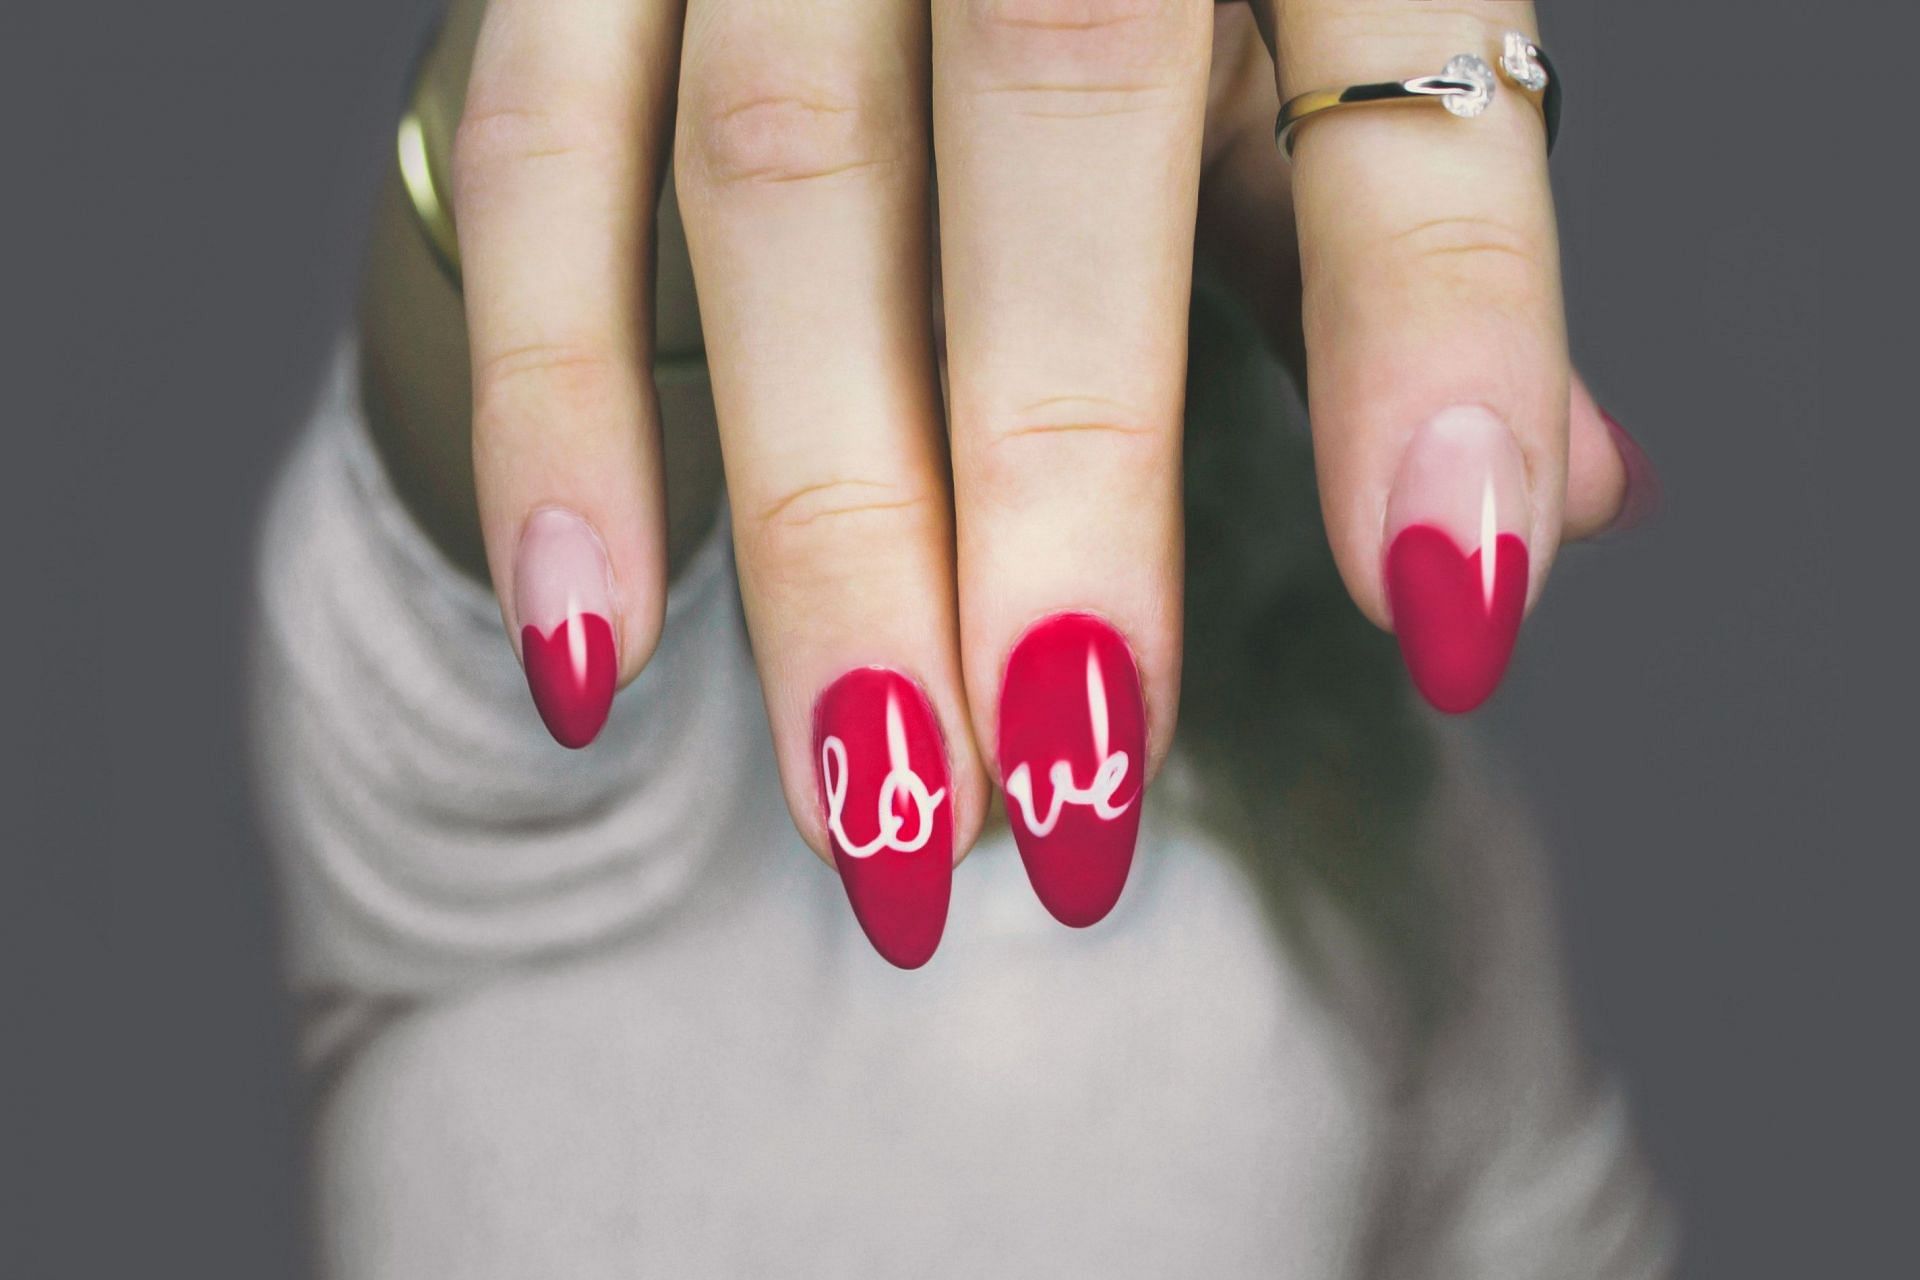 Healthy nails are a sign of a healthy body. (Image via Pexels)